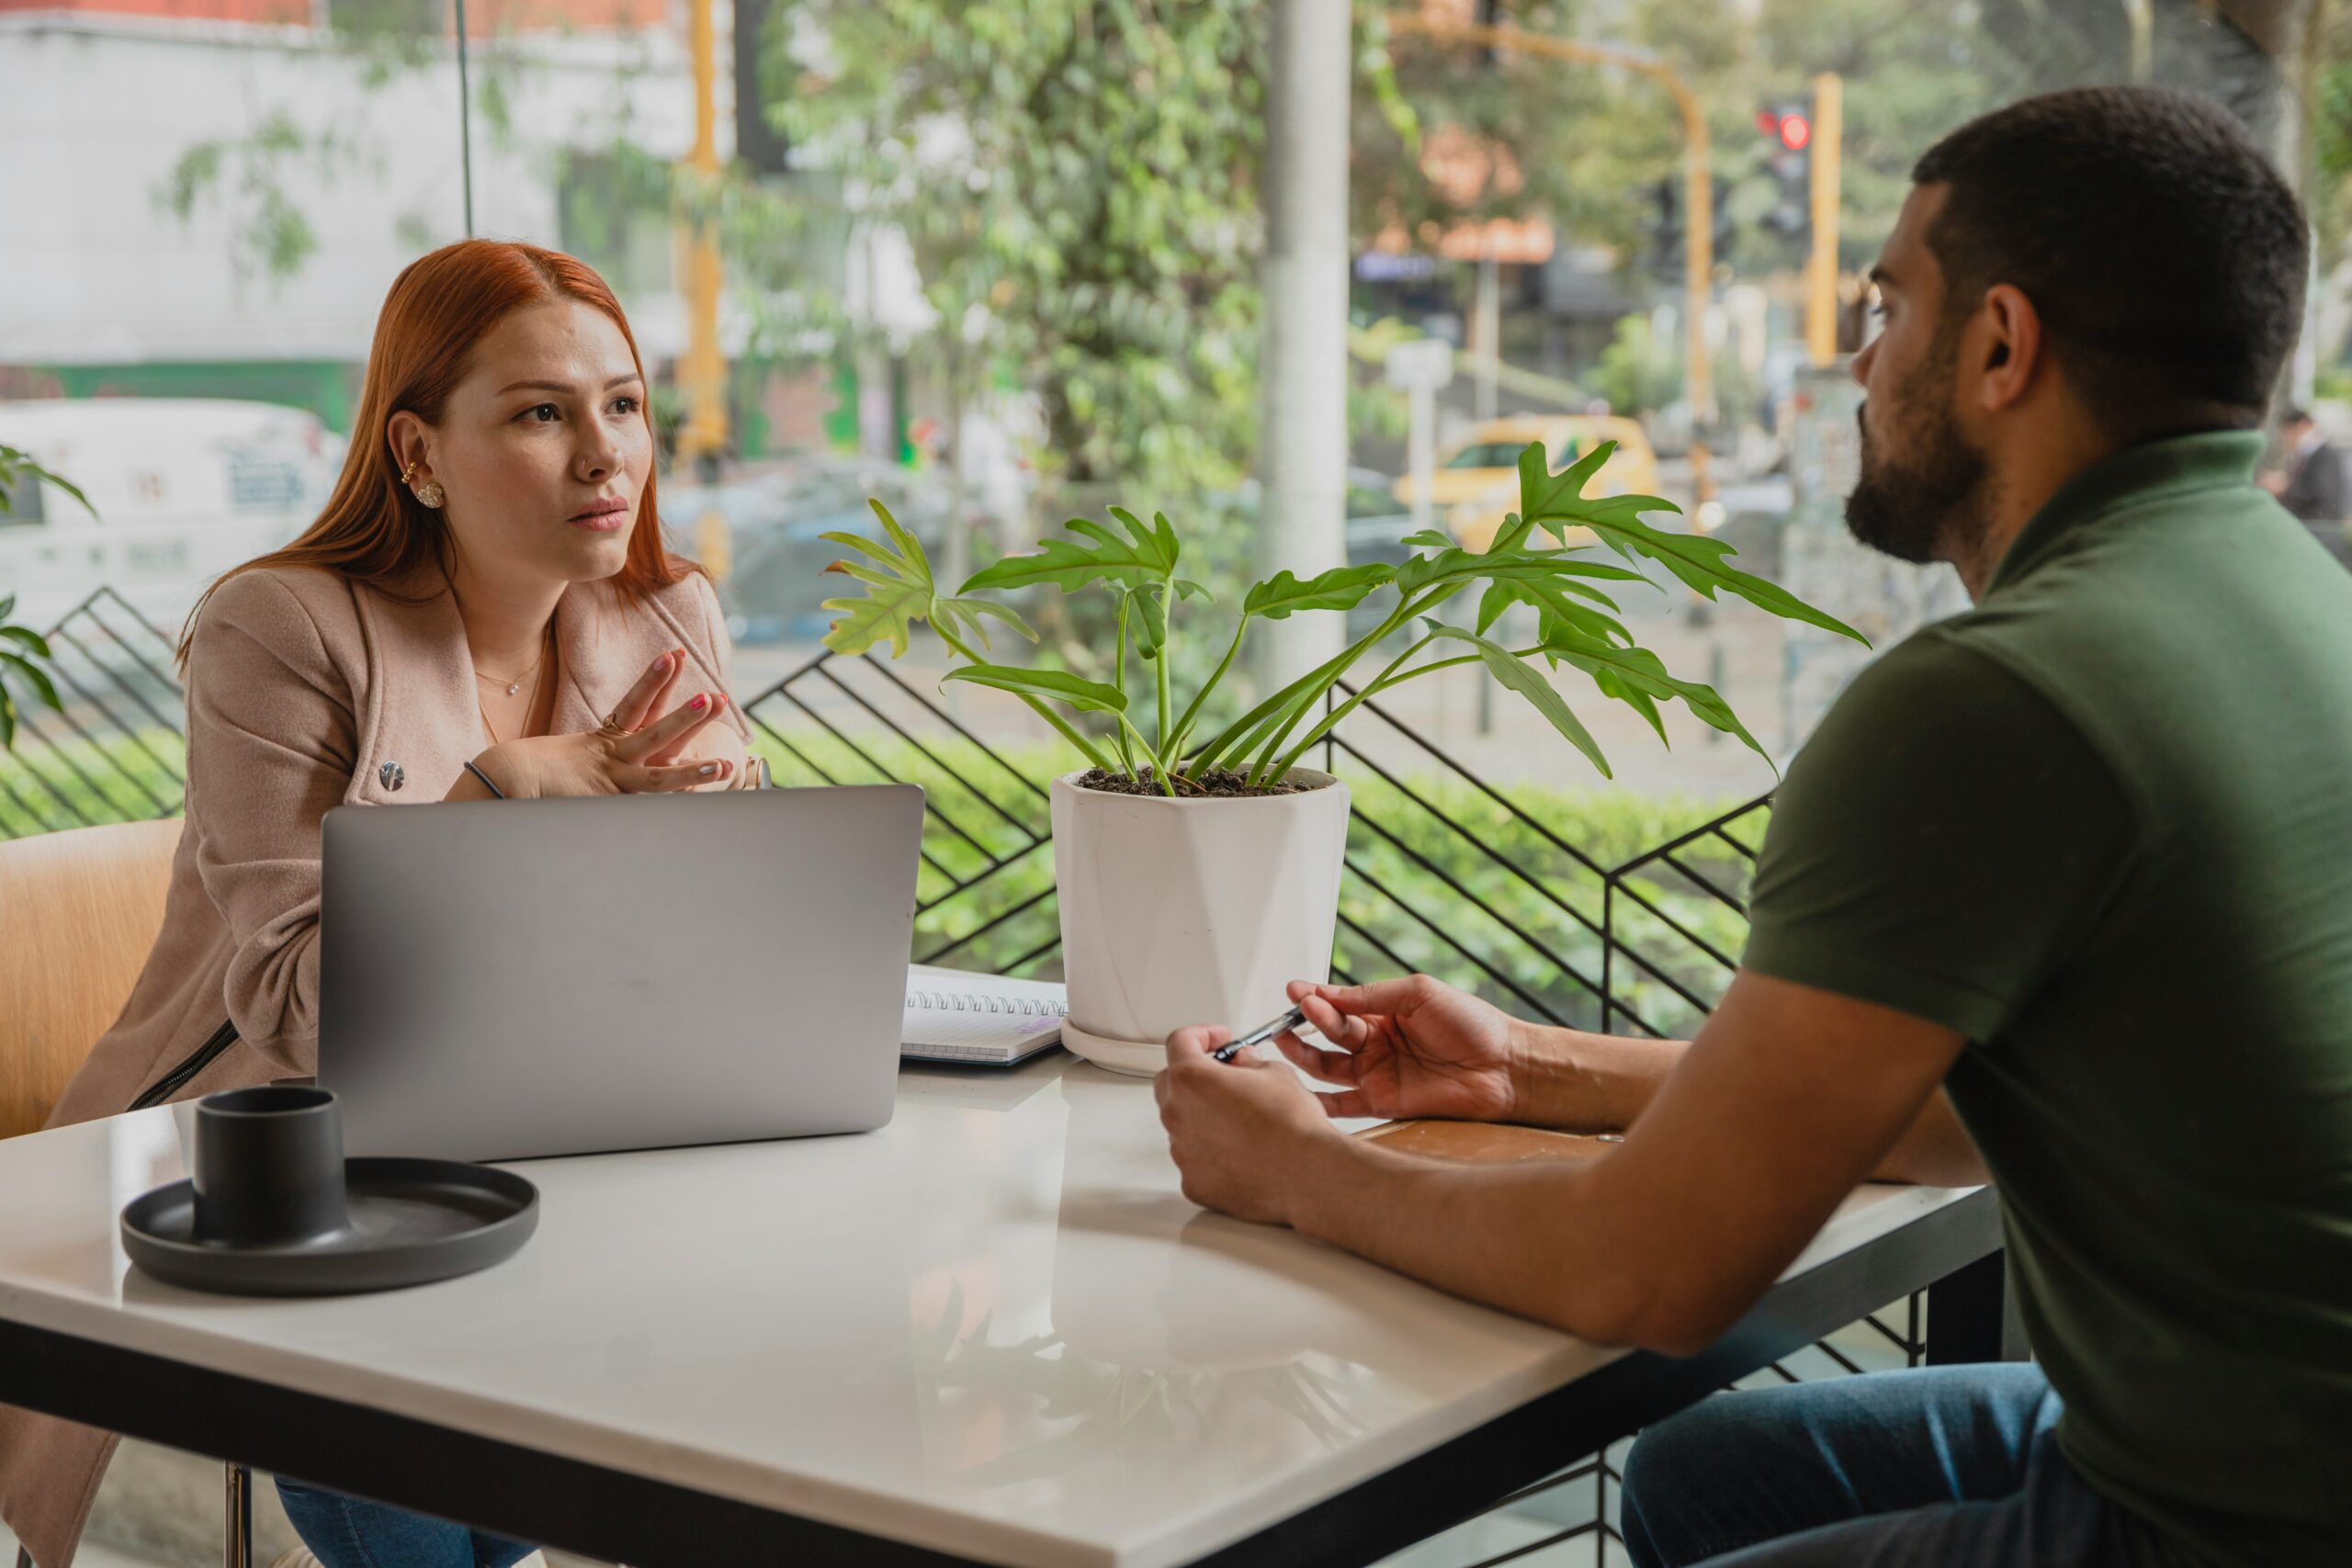 A woman and a man sit at a table with a laptop and a plant between them in a cafe, engaged in a serious conversation about what makes a good IT consultant.